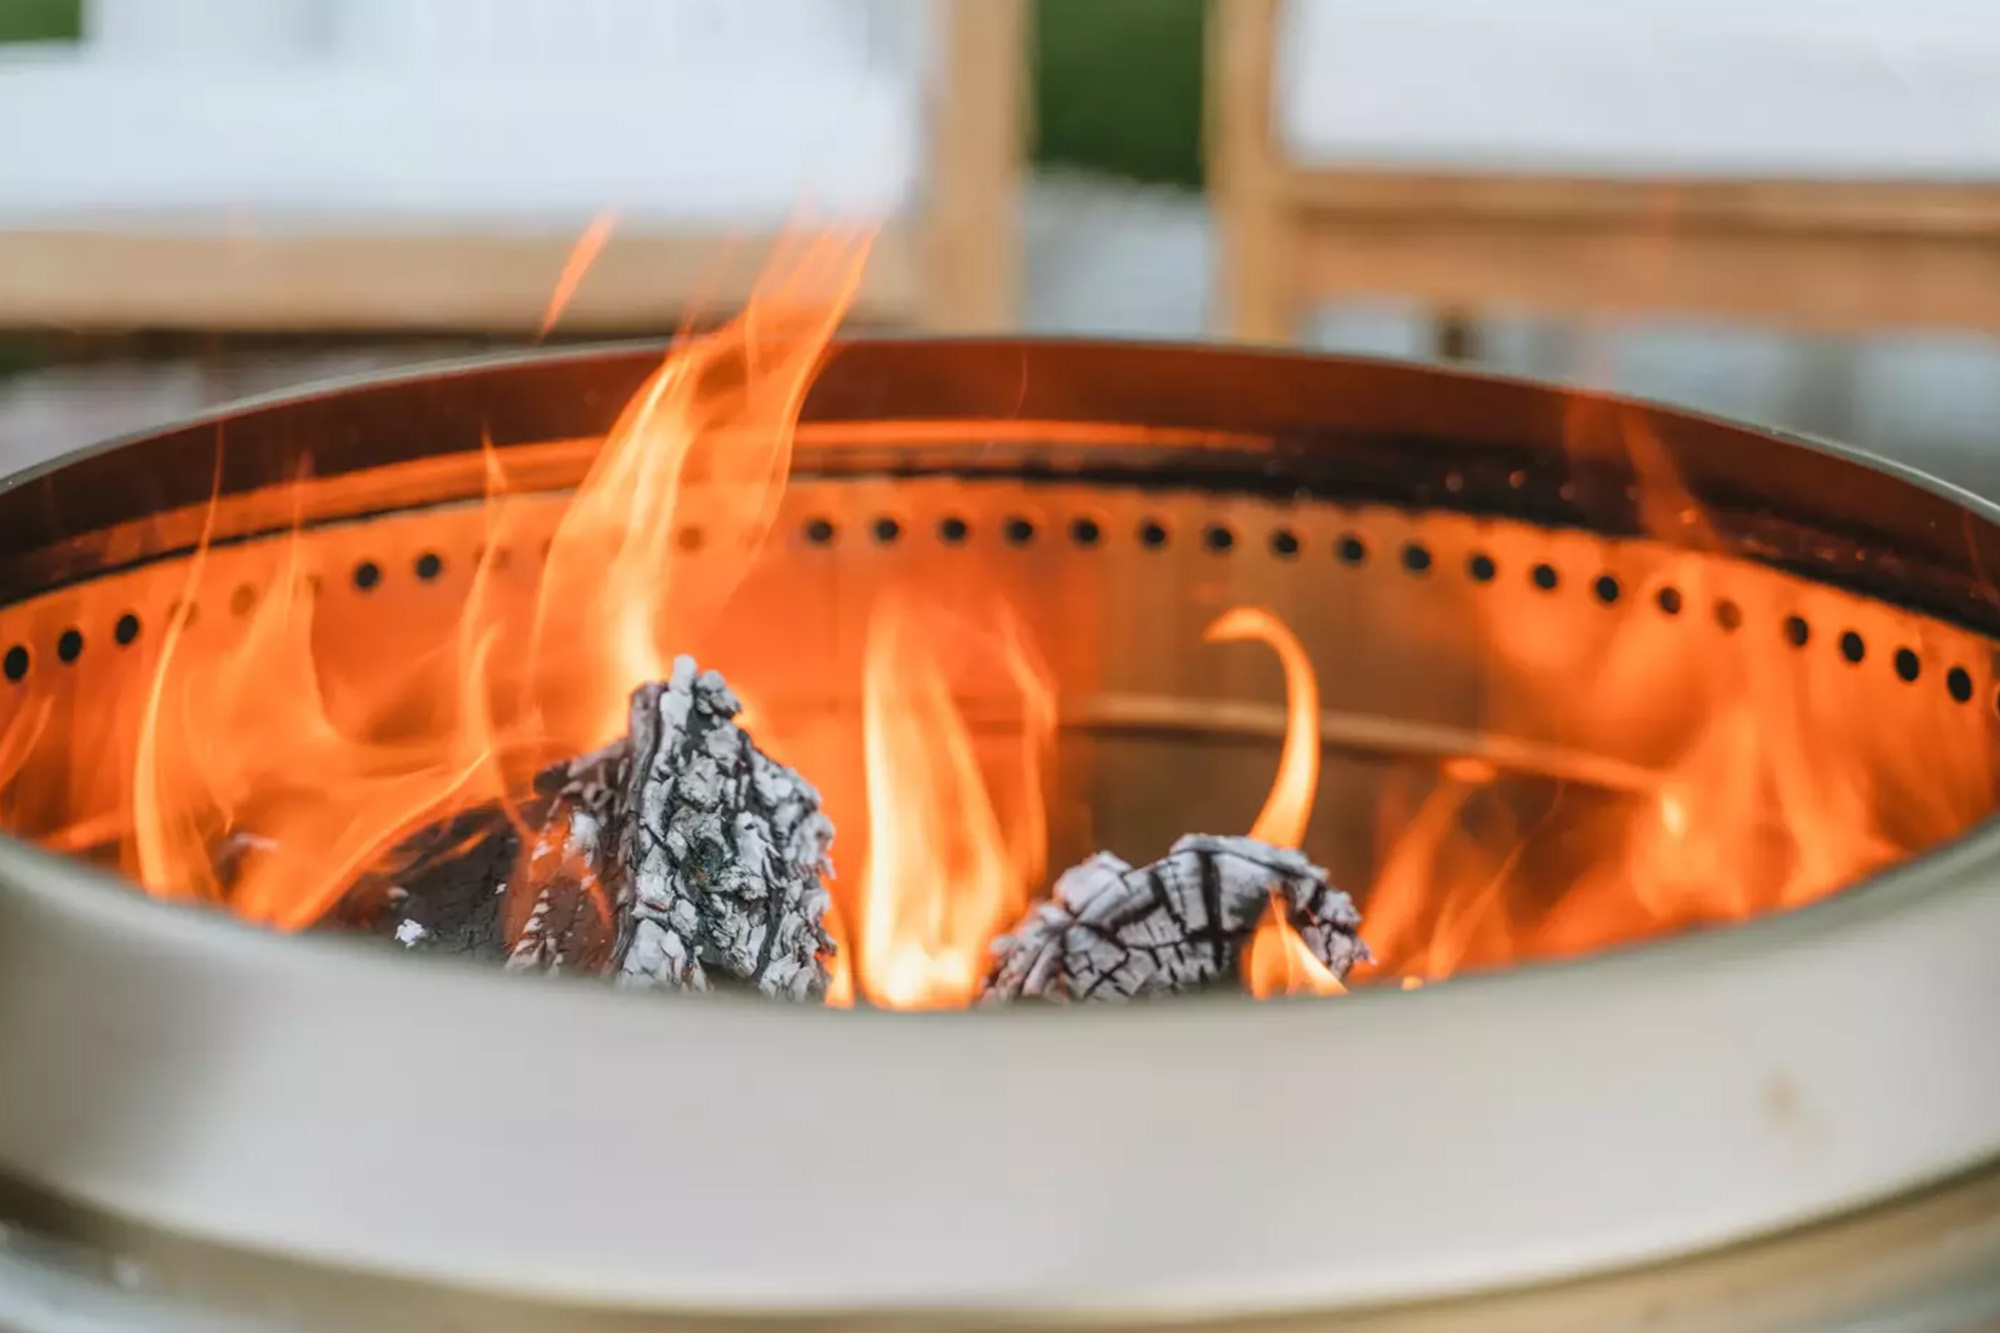 Cozy up to $200 in savings on this Solo Stove portable fire pit at Amazon